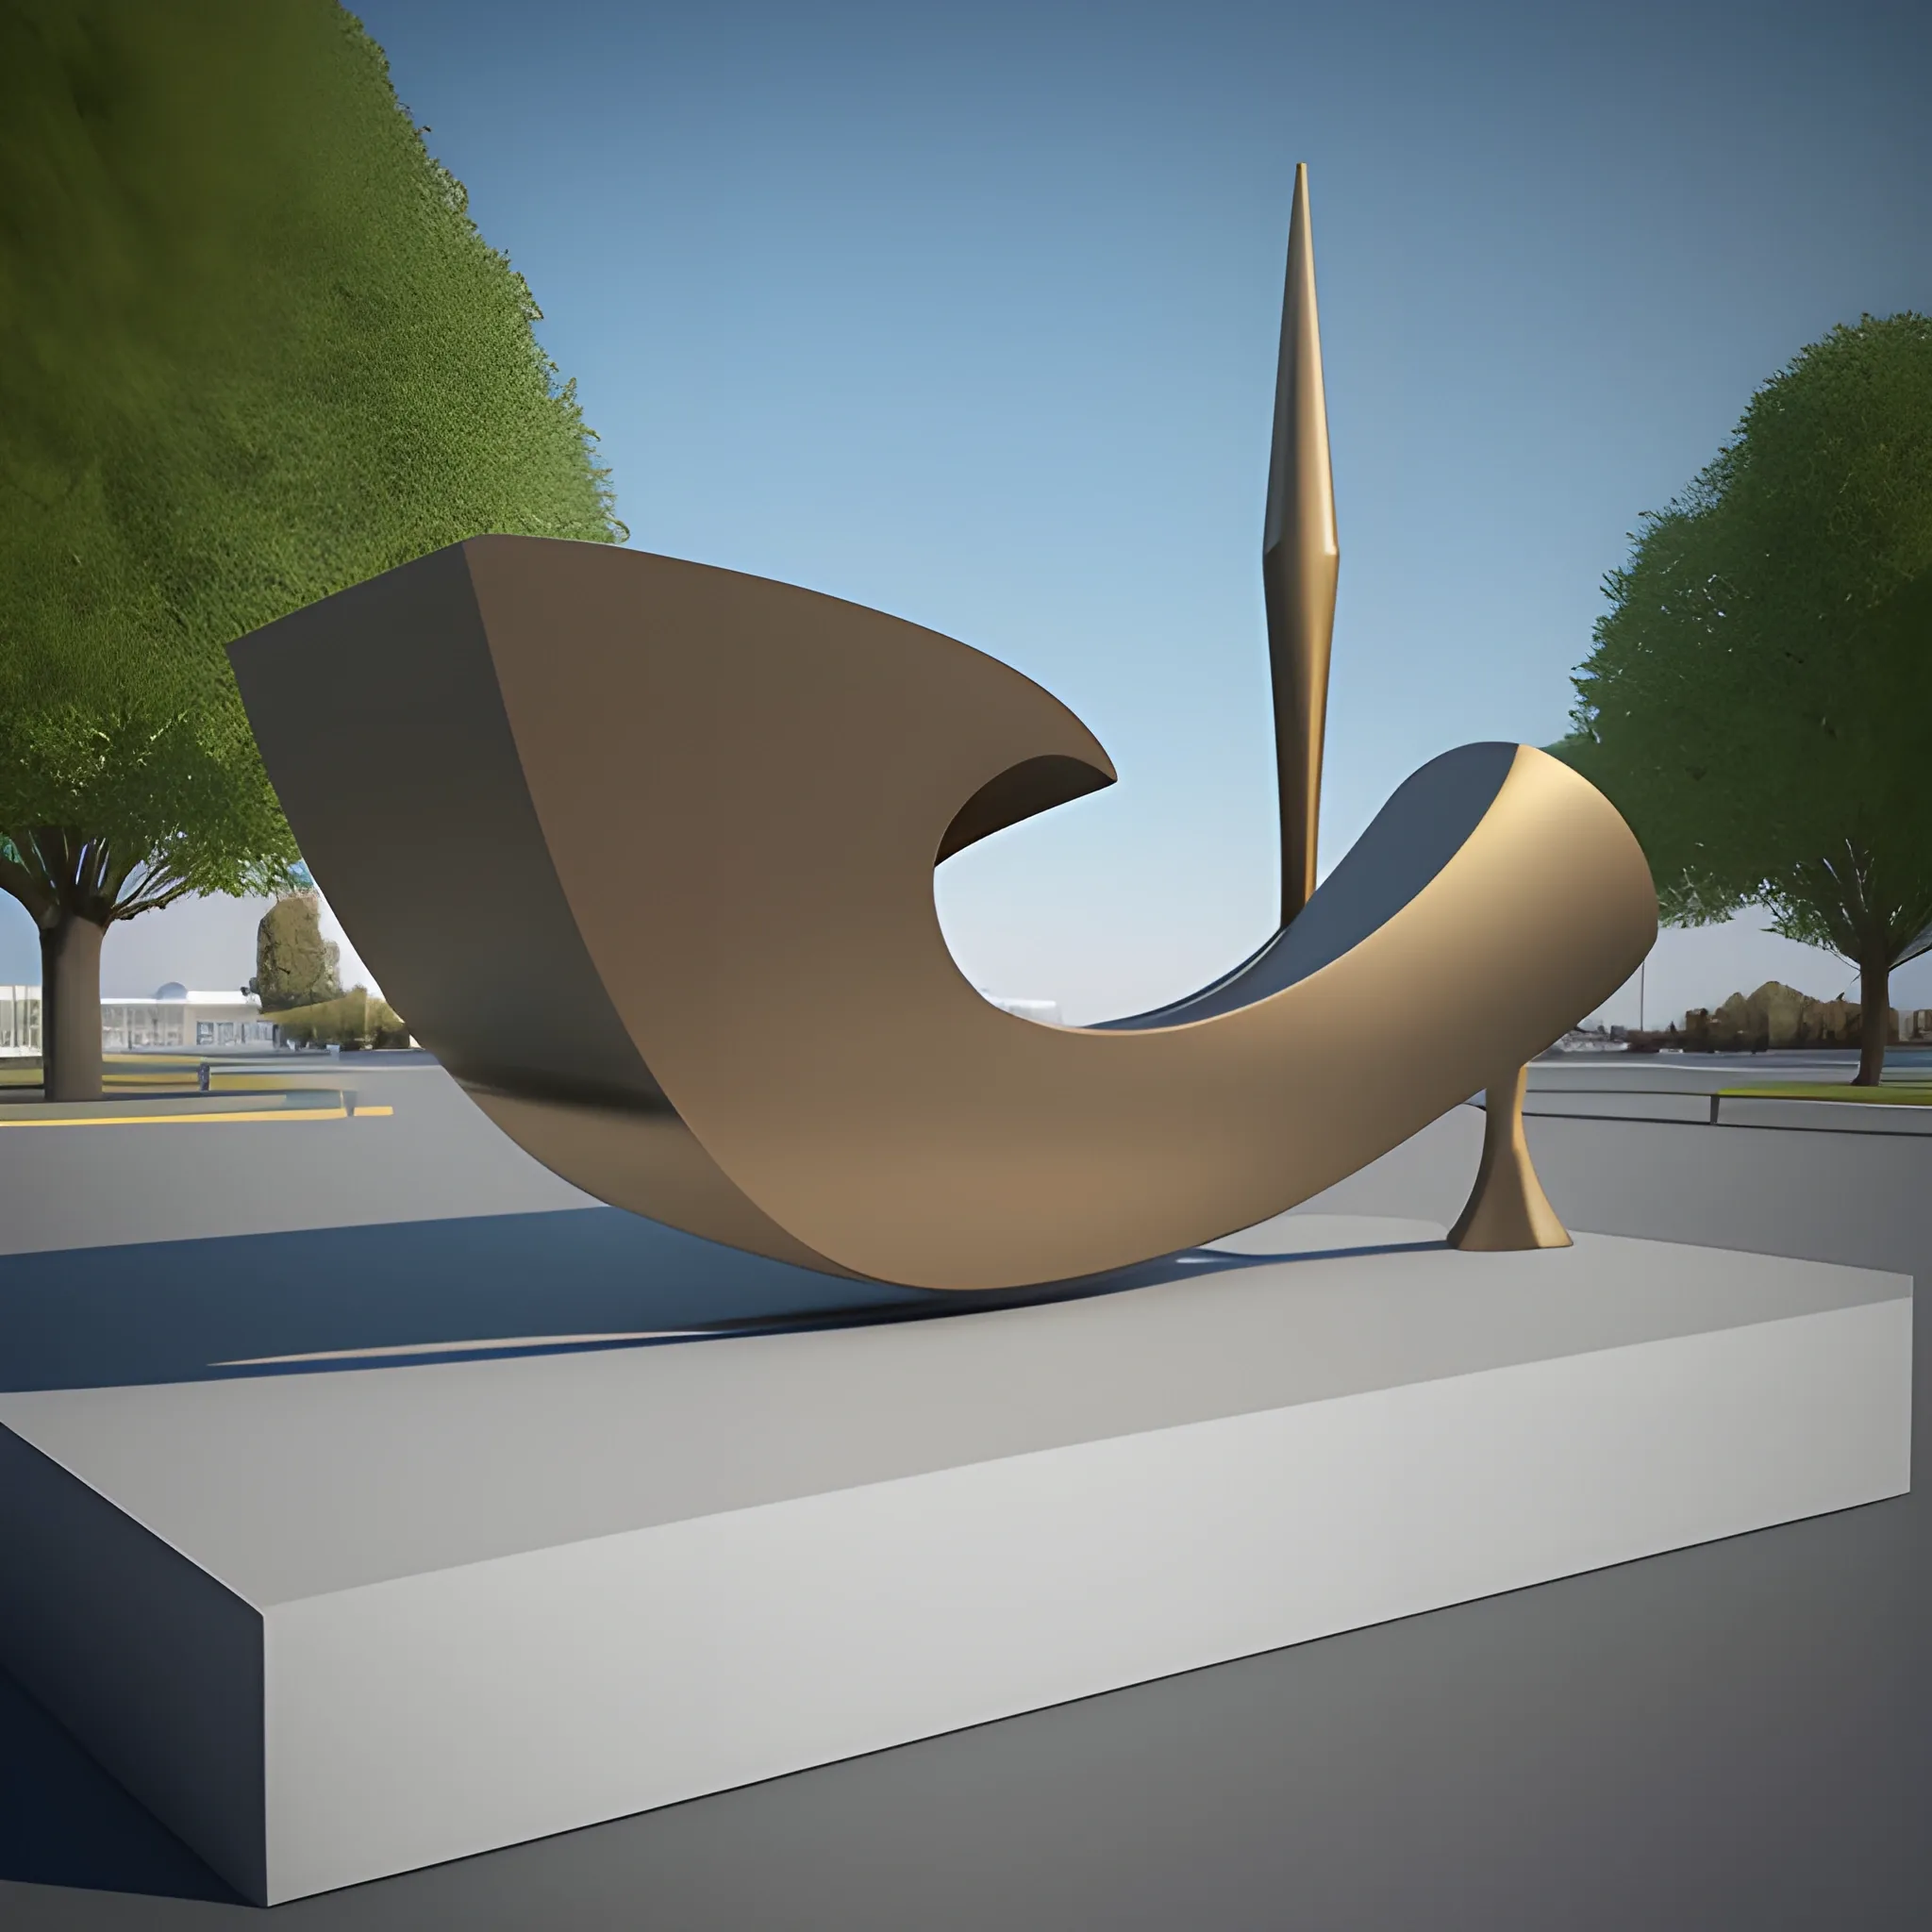 Create a monumental modern sculptured italian big dinner fork   in Claes Oldenburg style, simple design as Bahaus style, minimal, geometric simplicity, feature with gown, toga concept ,Bronce material surface and brick base, asymetric composition,   big locomotion expression,  blue sky background, pretty detailed HD render, classic base, fountain, 3D, 3D, 3D